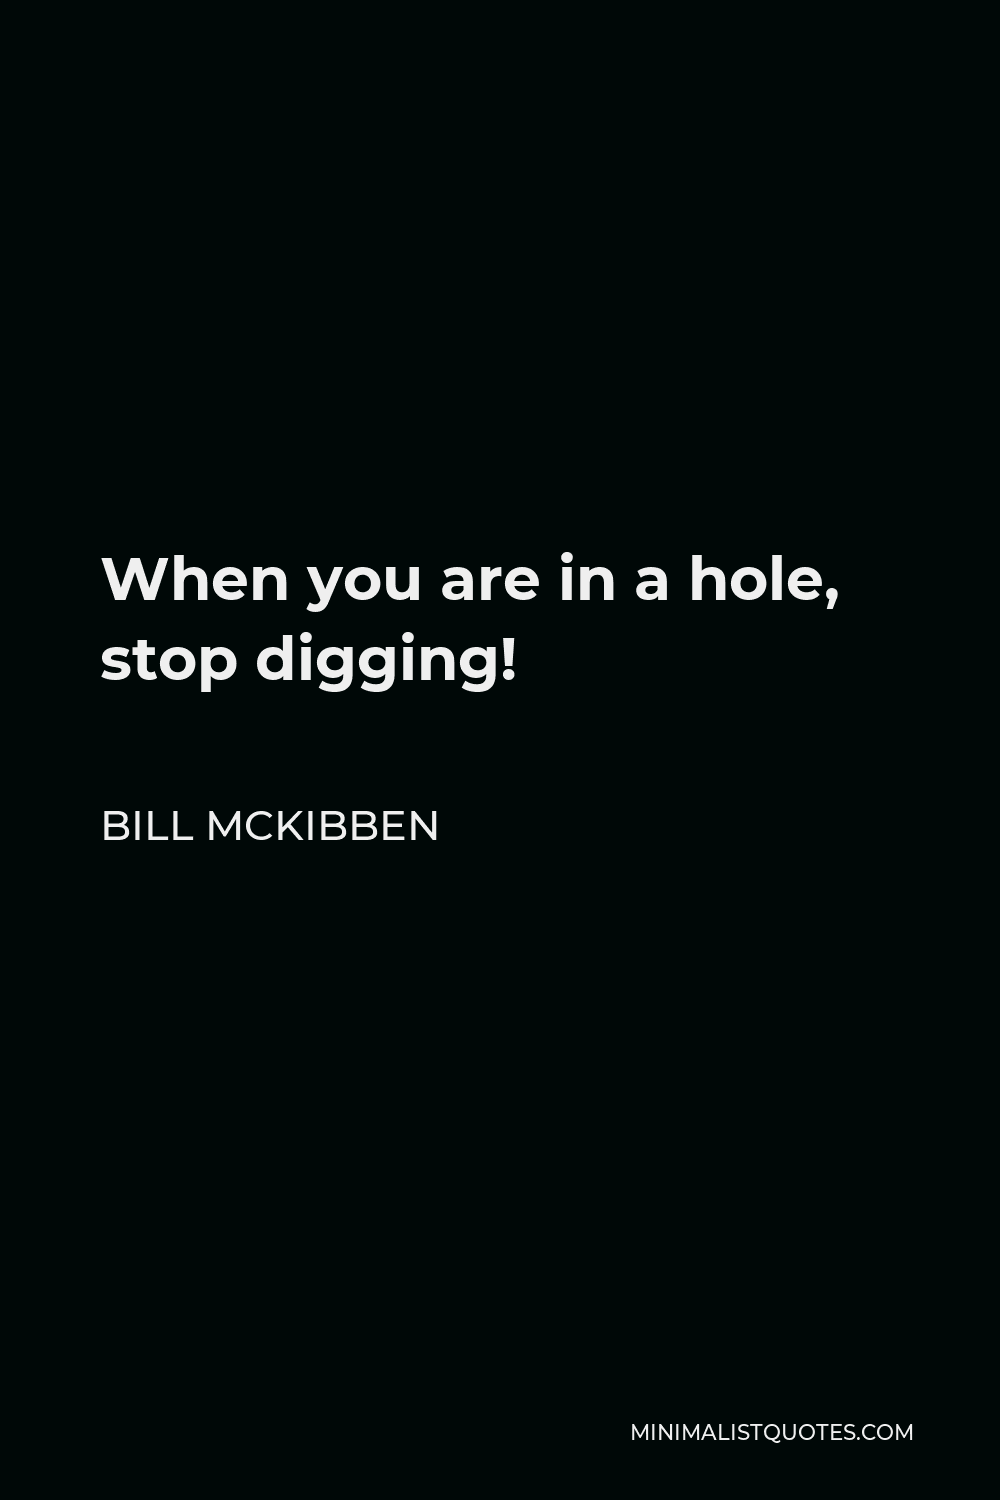 Bill McKibben Quote - When you are in a hole, stop digging!